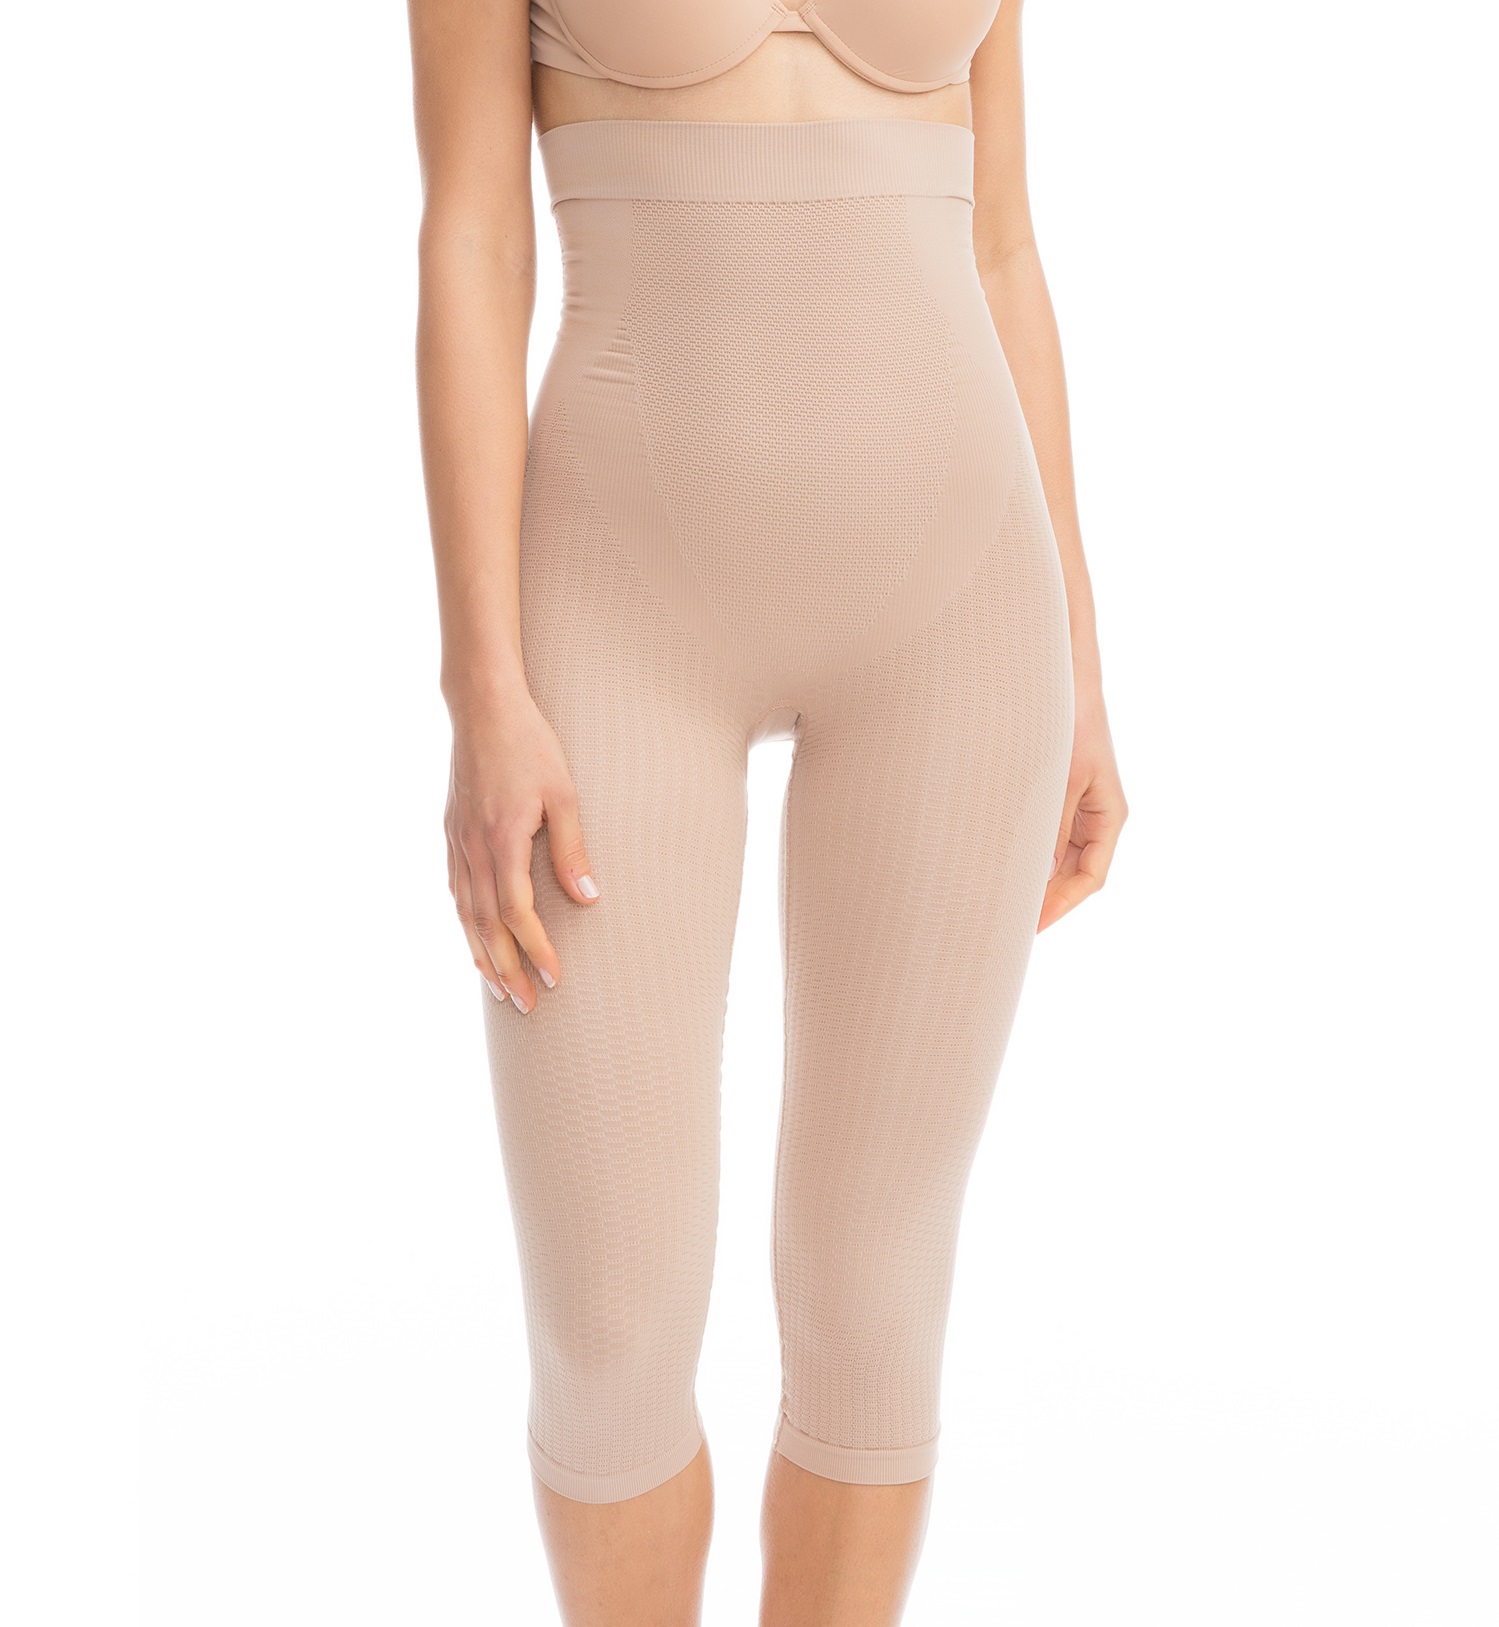 Buy SlimCell B8638000 High-waisted push-up anti-cellulite leggings